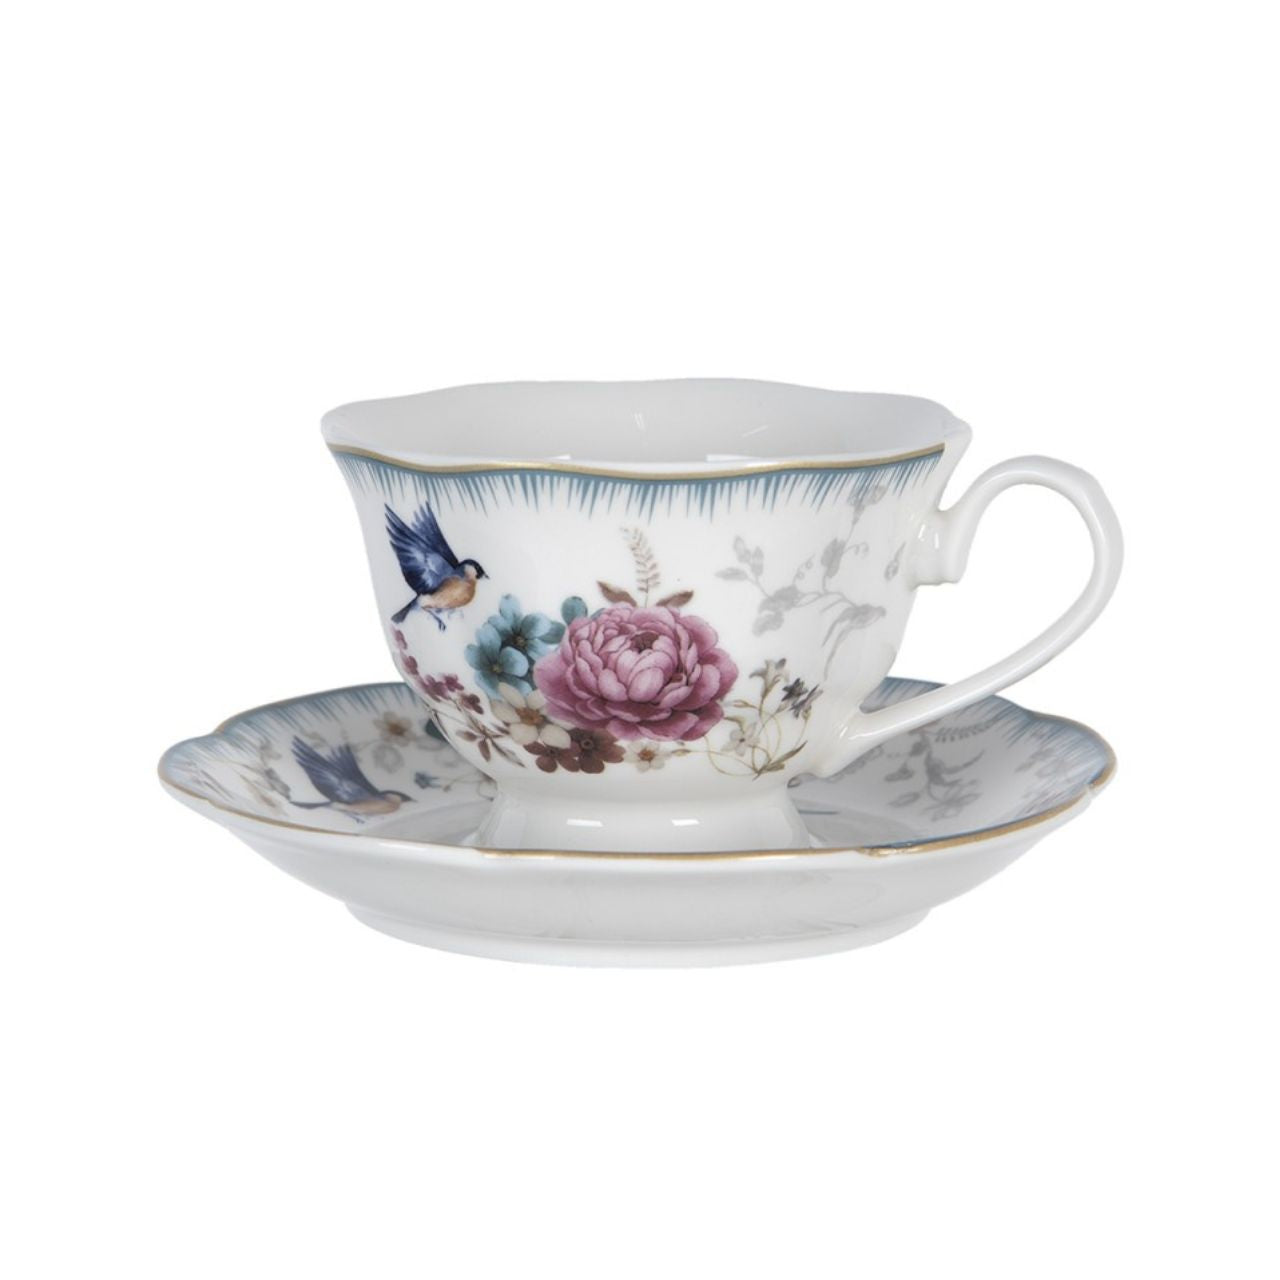 Made from high-quality ceramic, this cup and saucer set offers durability and is resistant to daily use. The refined design with a floral print and subtle gold accents makes this set a true eyecatcher on your table.